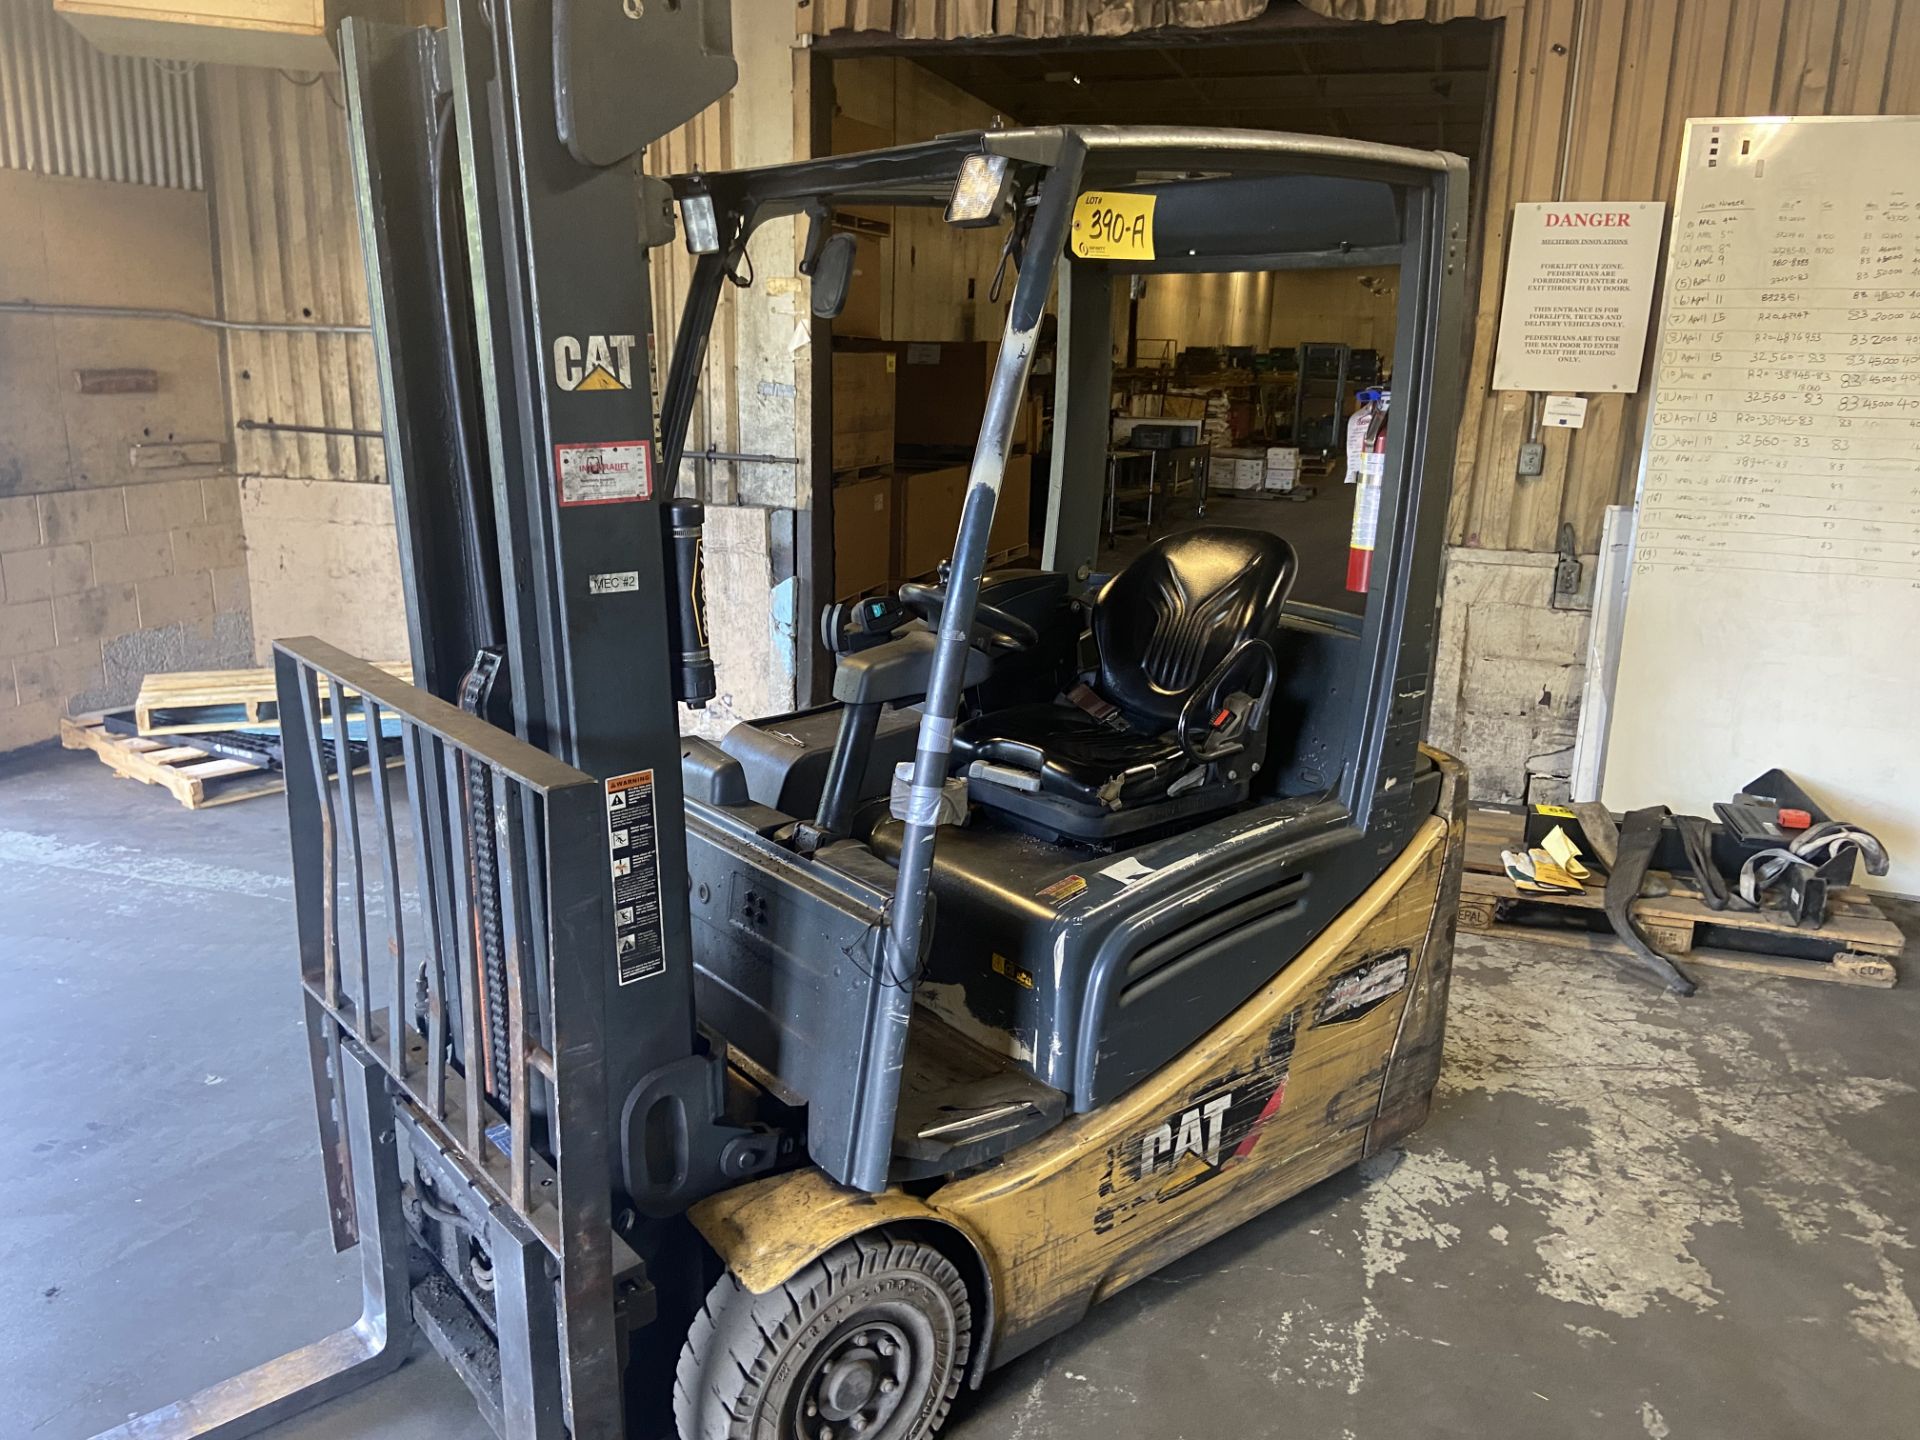 CAT 3-WHEEL ELECTRIC FORKLIFT W/ BATTERY CHARGER (NOTE: SUBJECT TO LATE REMOVAL, PICKUP AFTER MAY